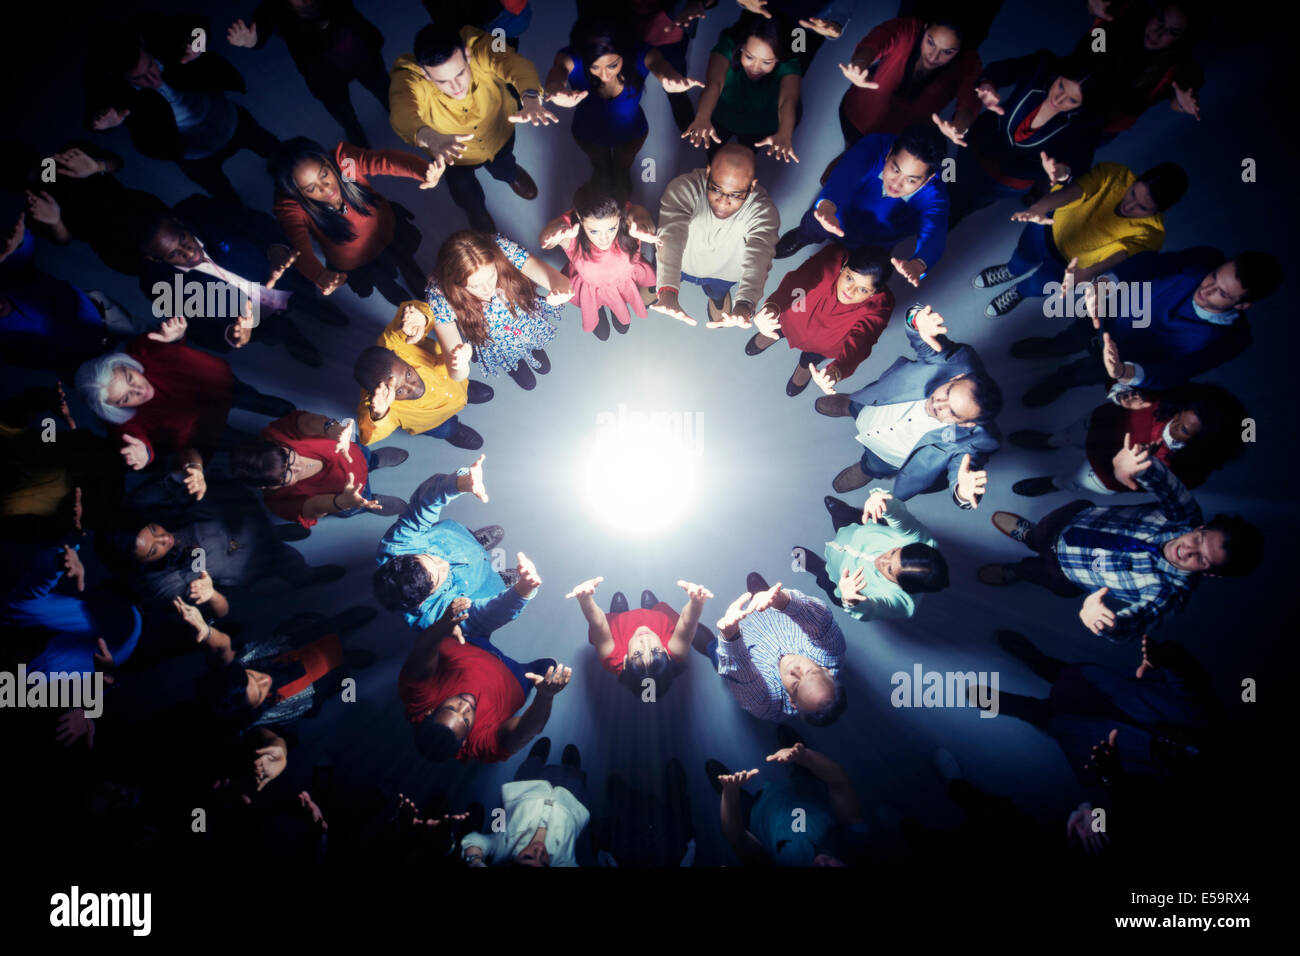 Business people forming circle around bright light Stock Photo